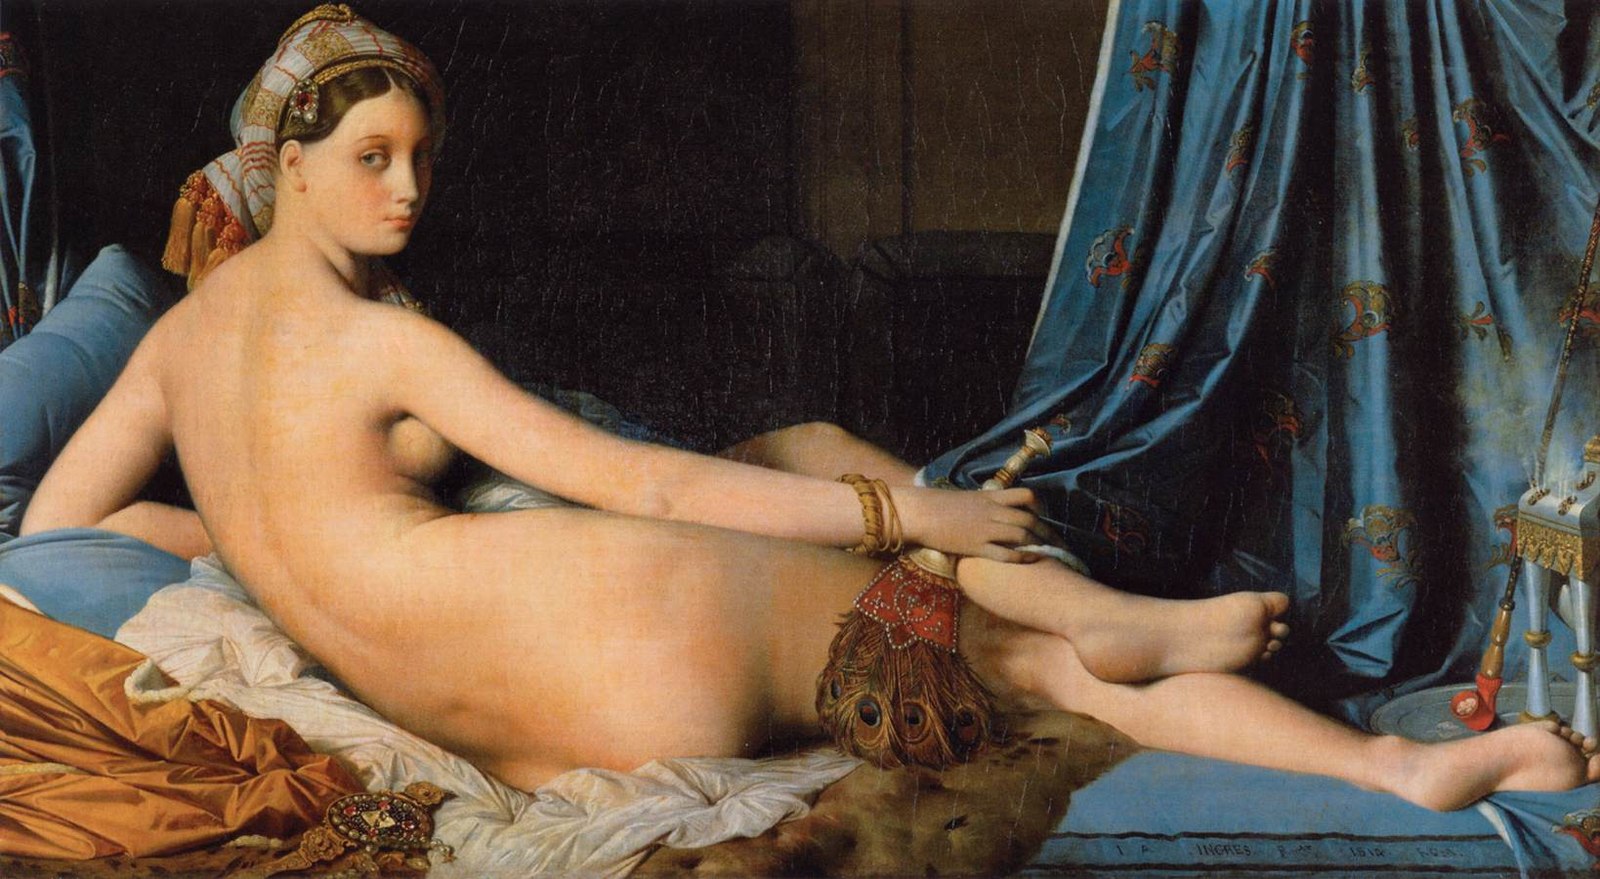 A nude women laying on her side with her back toward the viewer